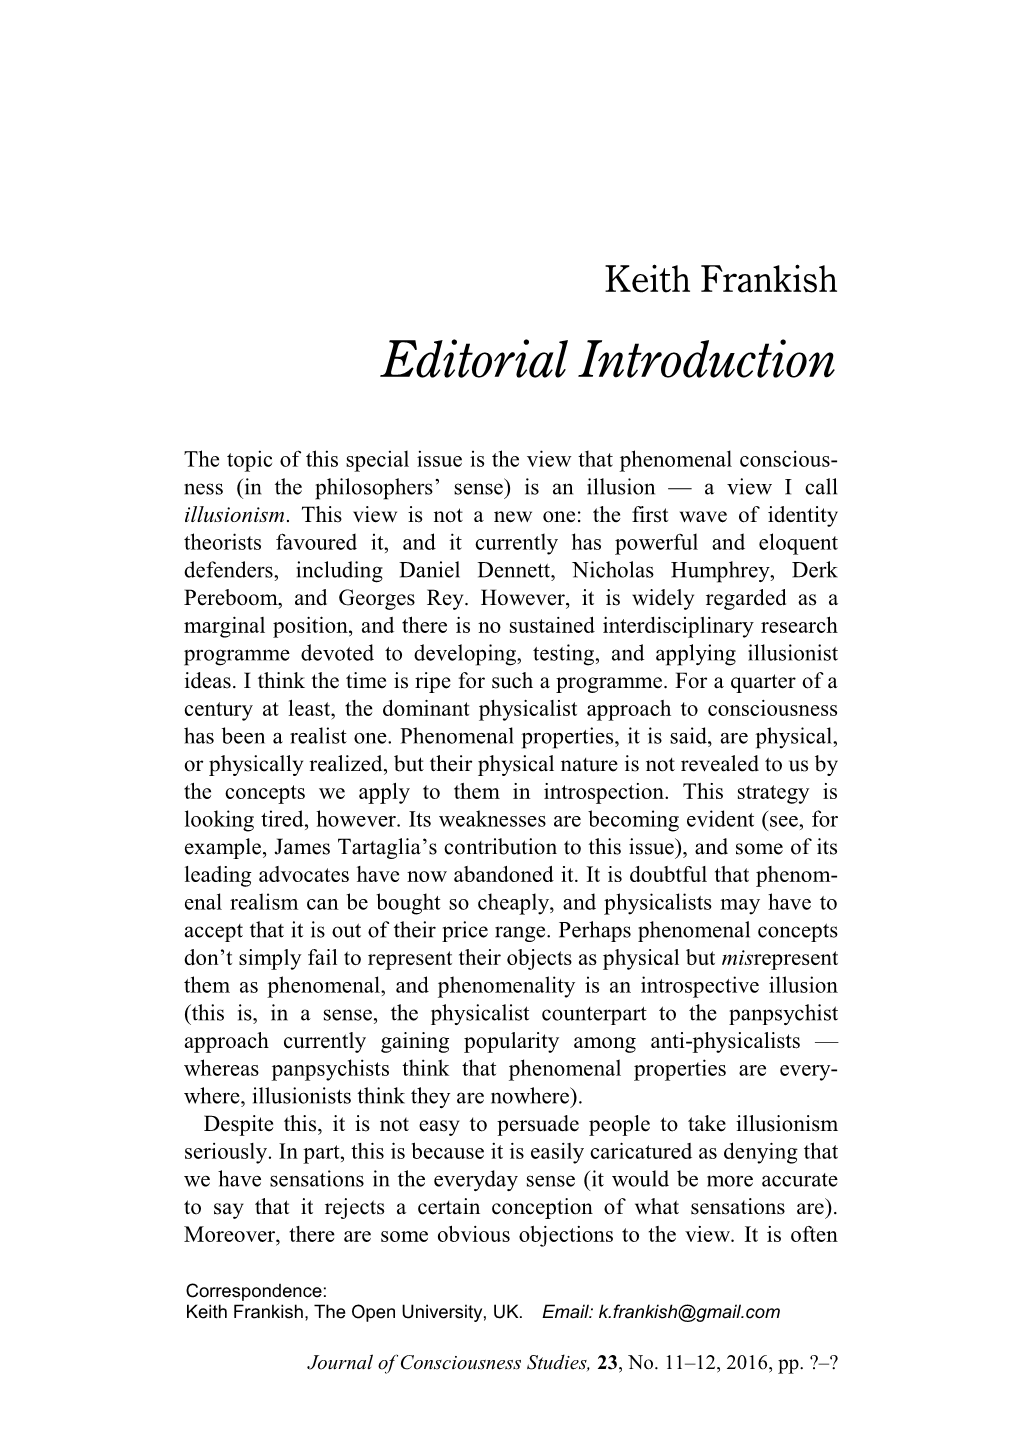 Editorial Introduction